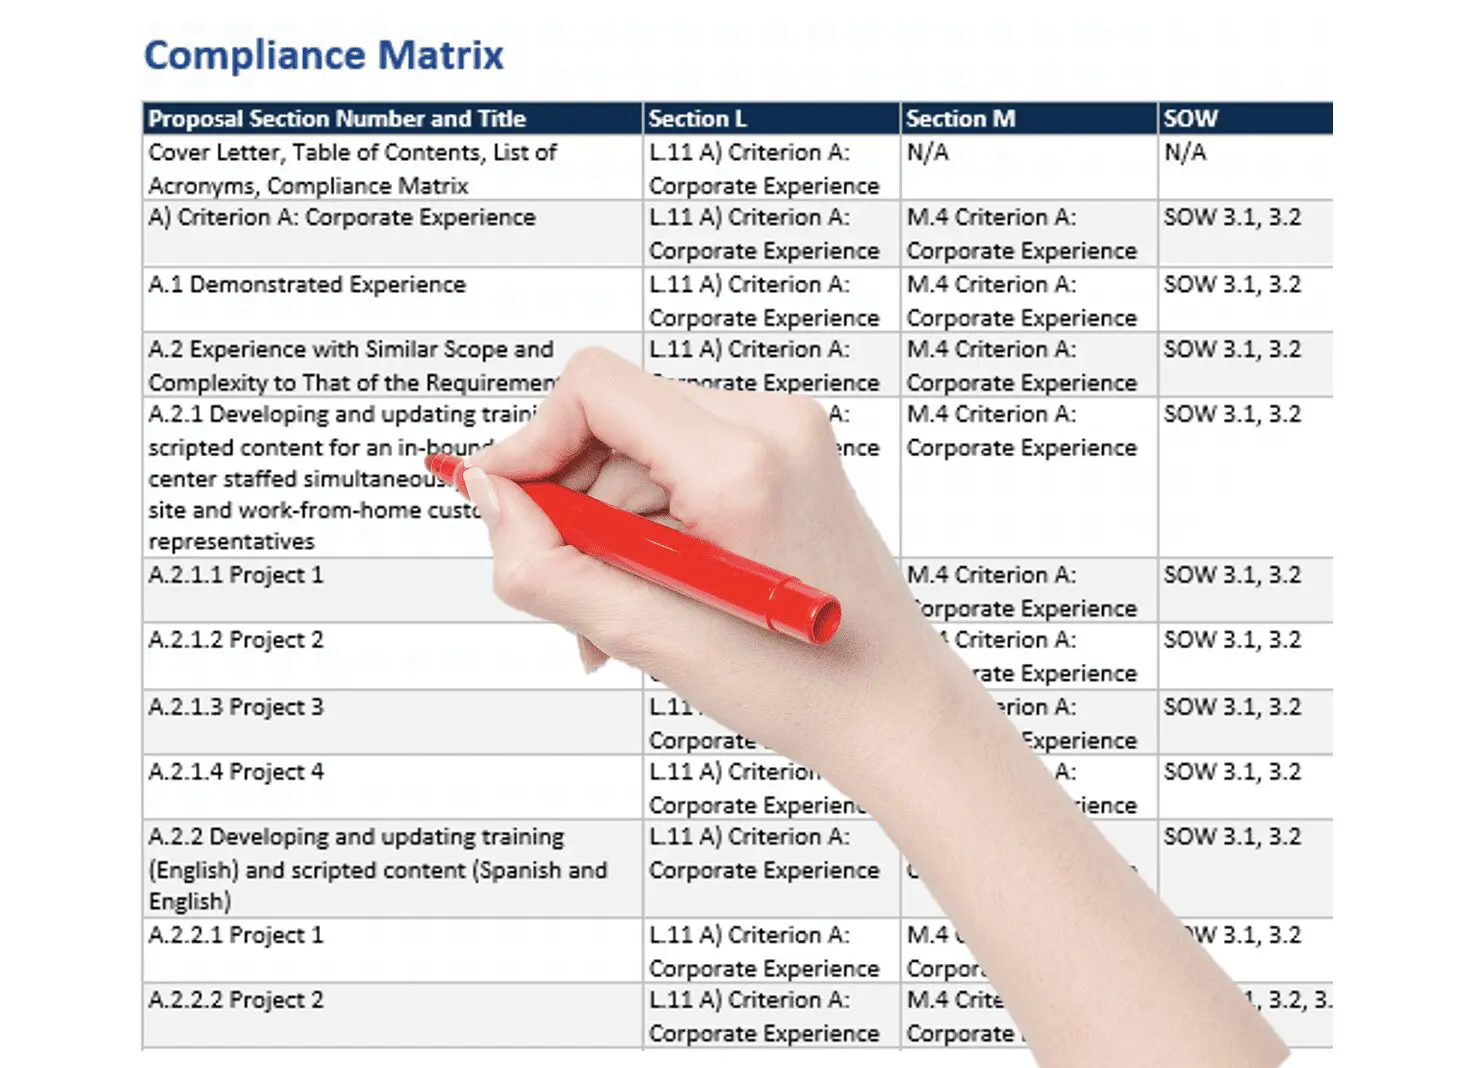 Proposal Compliance Matrix, Cross-Reference Matrix, & Checklists – How to Use Them & What is the Difference?